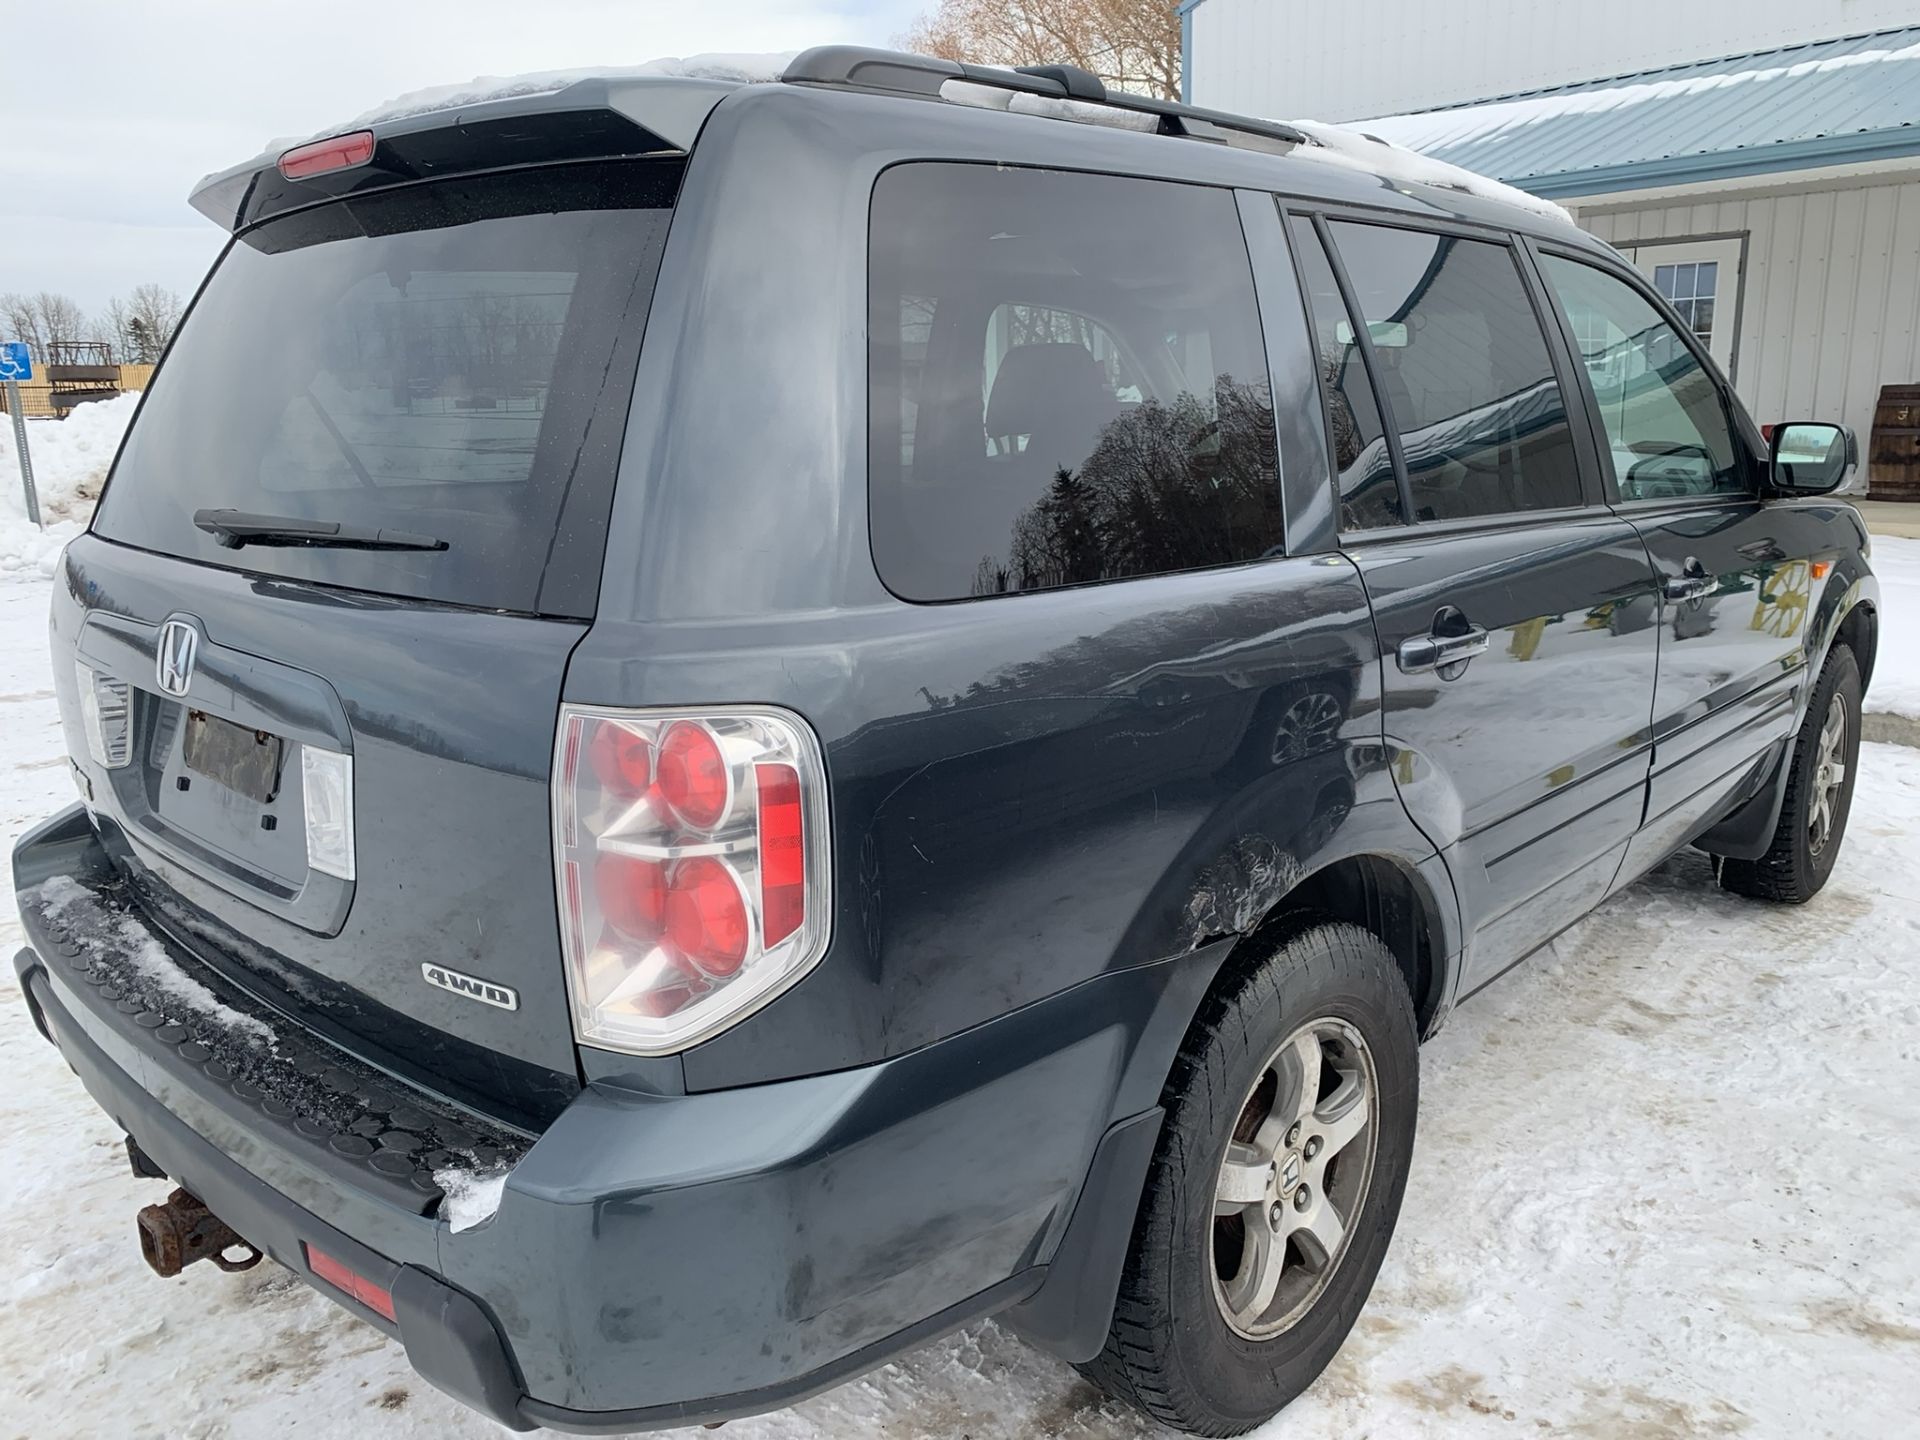 2006 HONDA PILOT SUV, AWD, V6, 4DR, LEATHER, APROX. 375,000 KMS SHOWING, S/N 2HKYF18546H003826 - Image 3 of 10